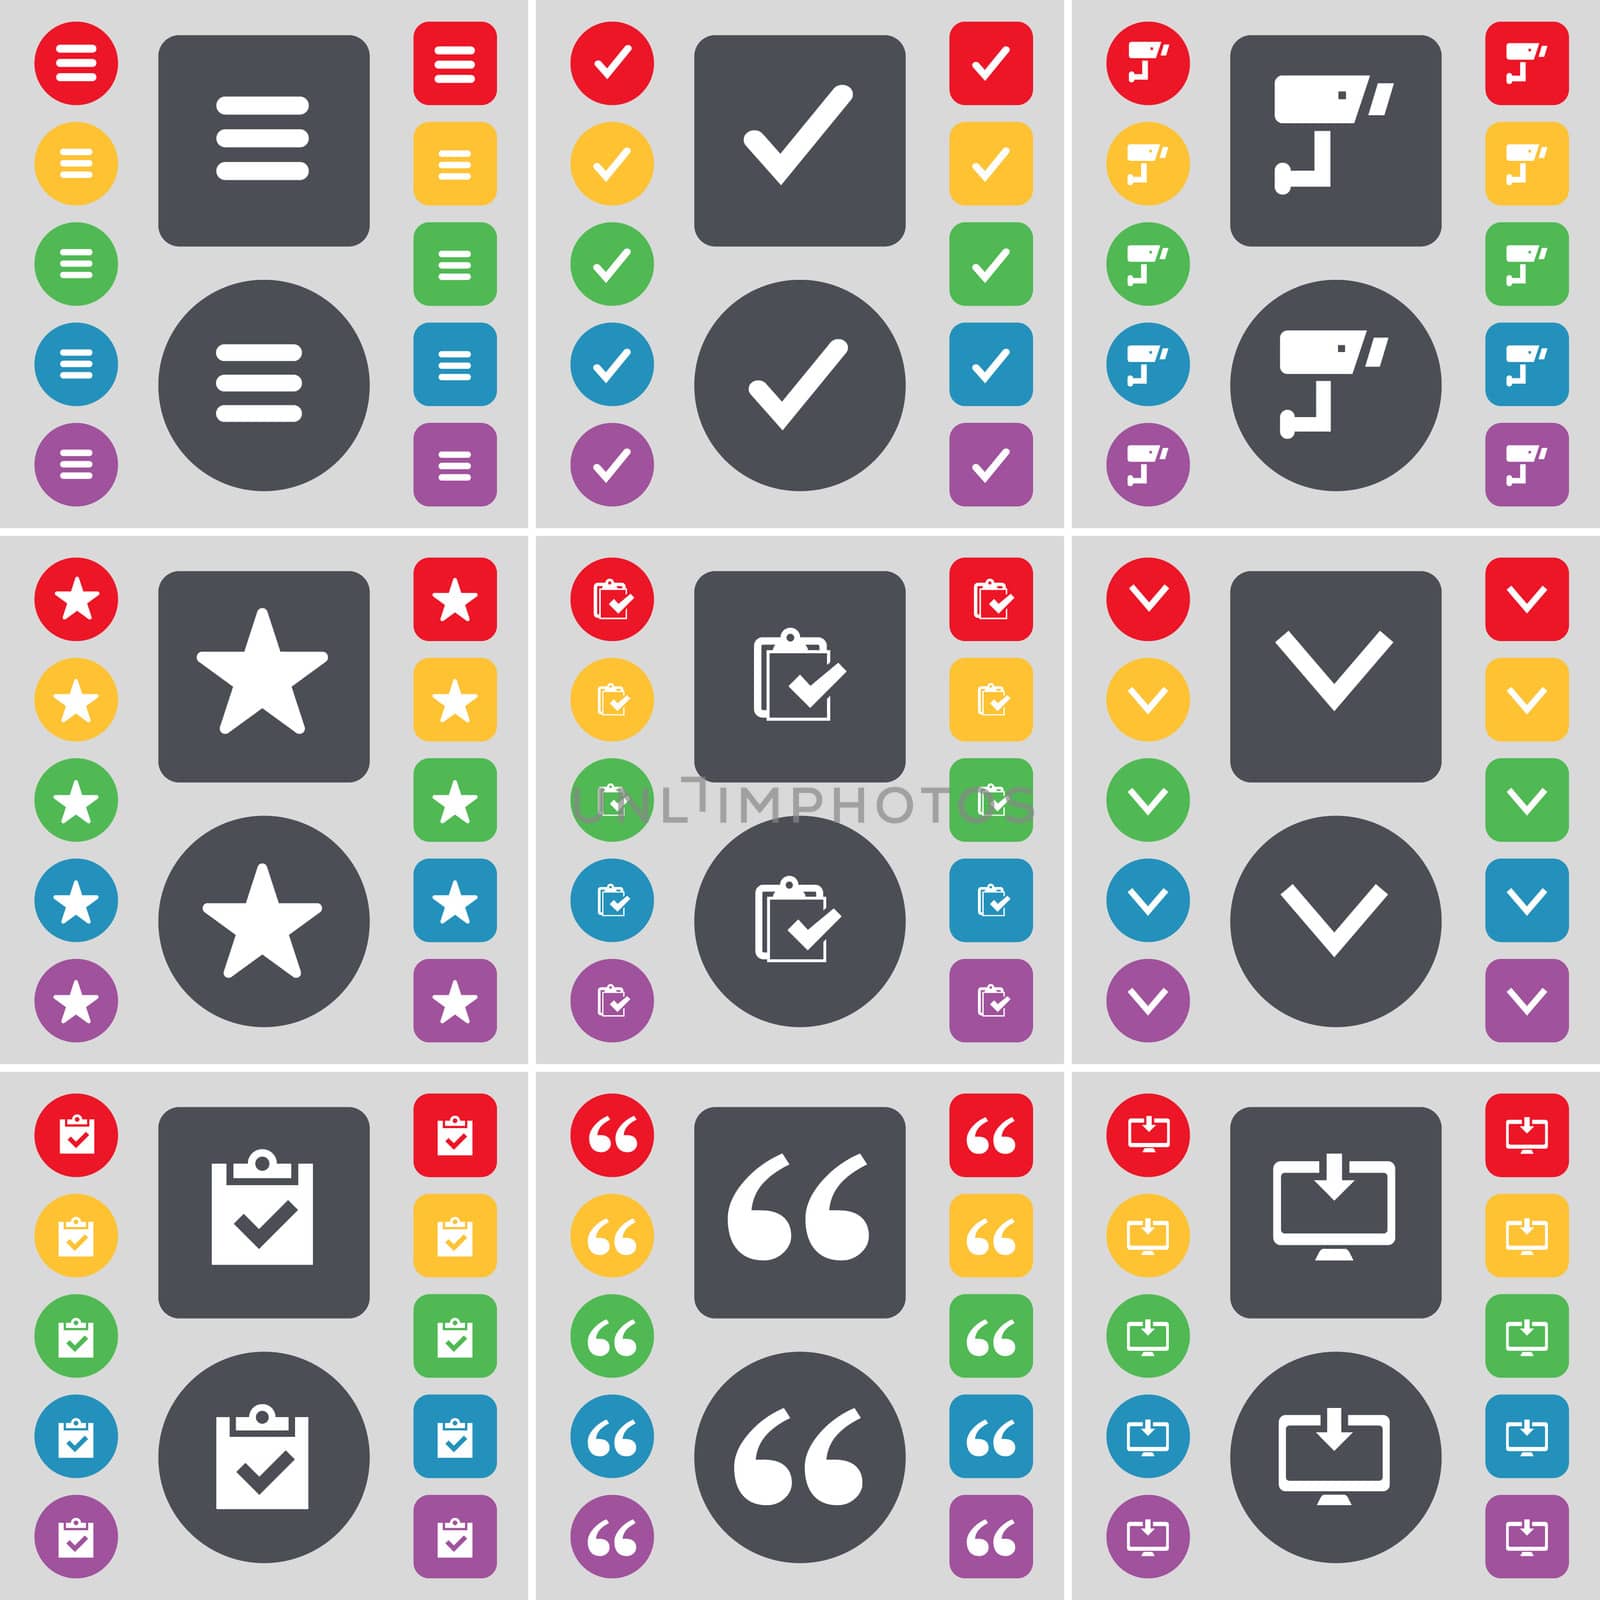 Apps, Tick, CCTV, Star, Survey, Arrow down, Survey, Quotation mark, Monitor icon symbol. A large set of flat, colored buttons for your design. illustration